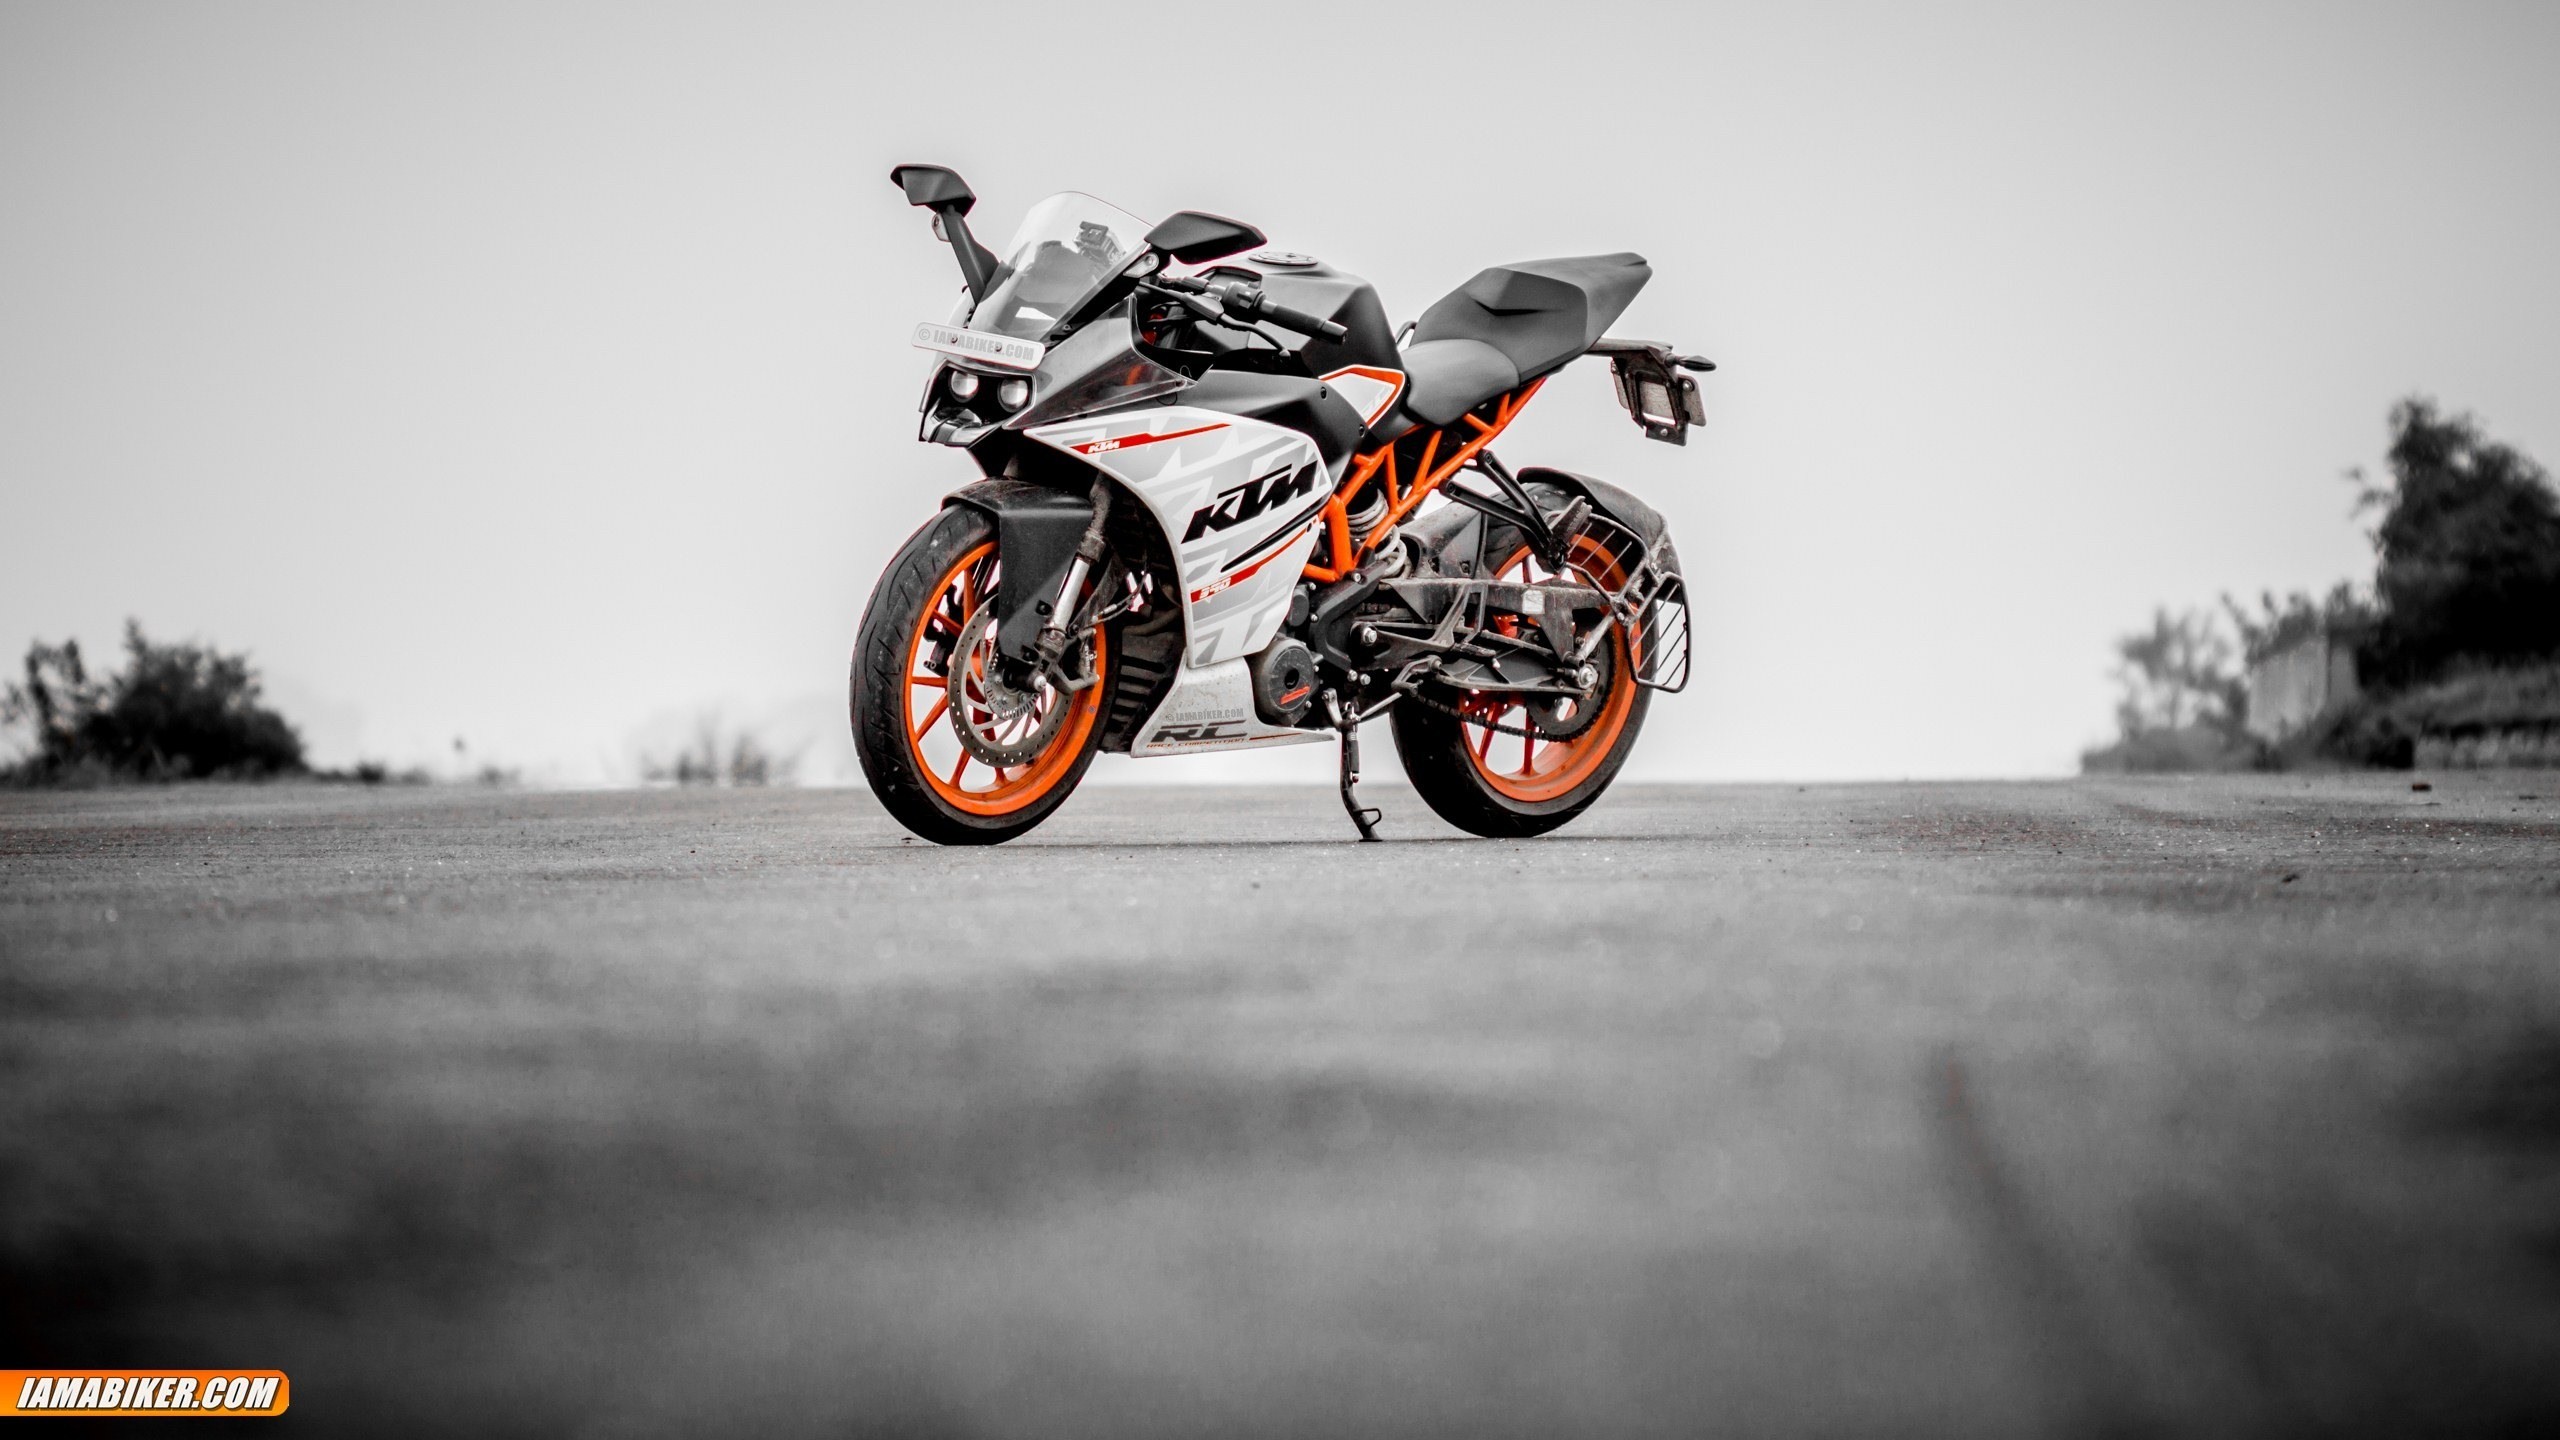 2560x1440 KTM RC 390 wallpapers - 1